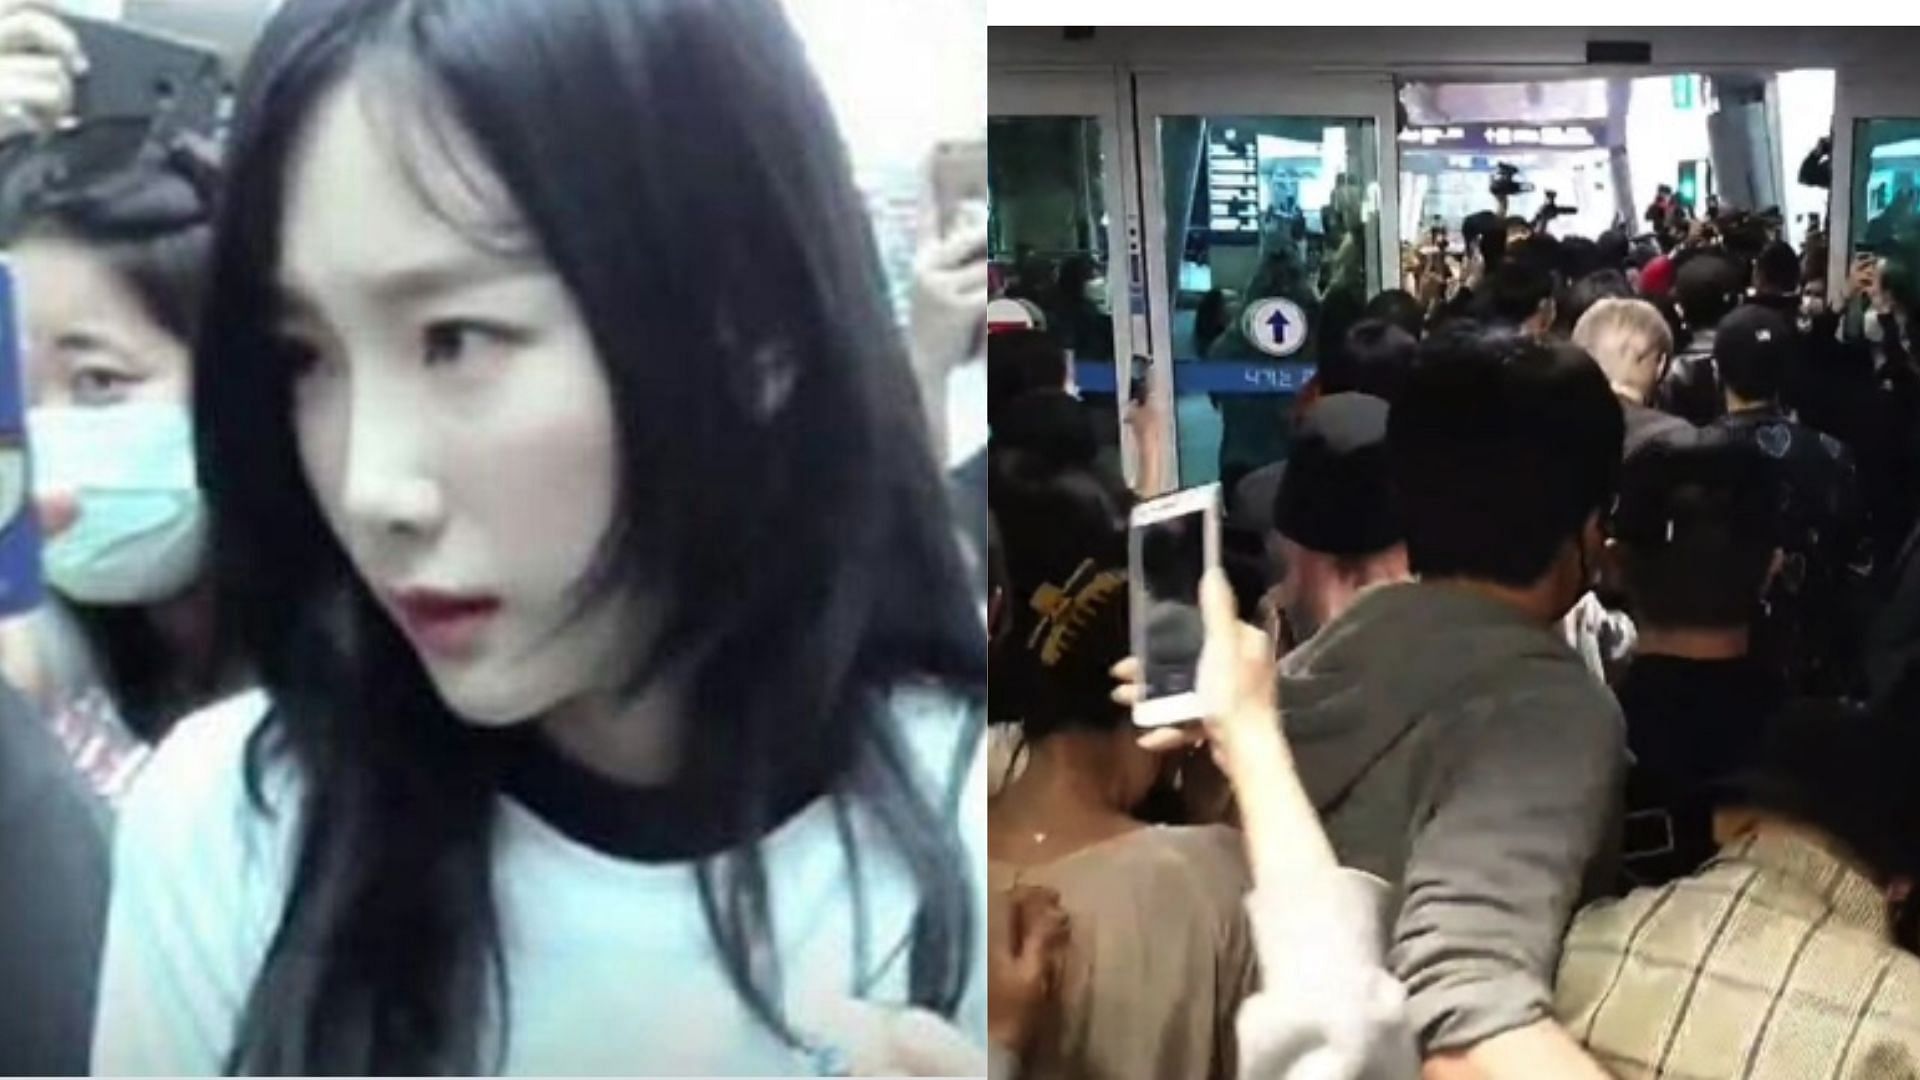 Tayeon and ENHYPEN mobbed at the airport (Images via Twitter/kooktaner and Twitter/HELL0KSN)